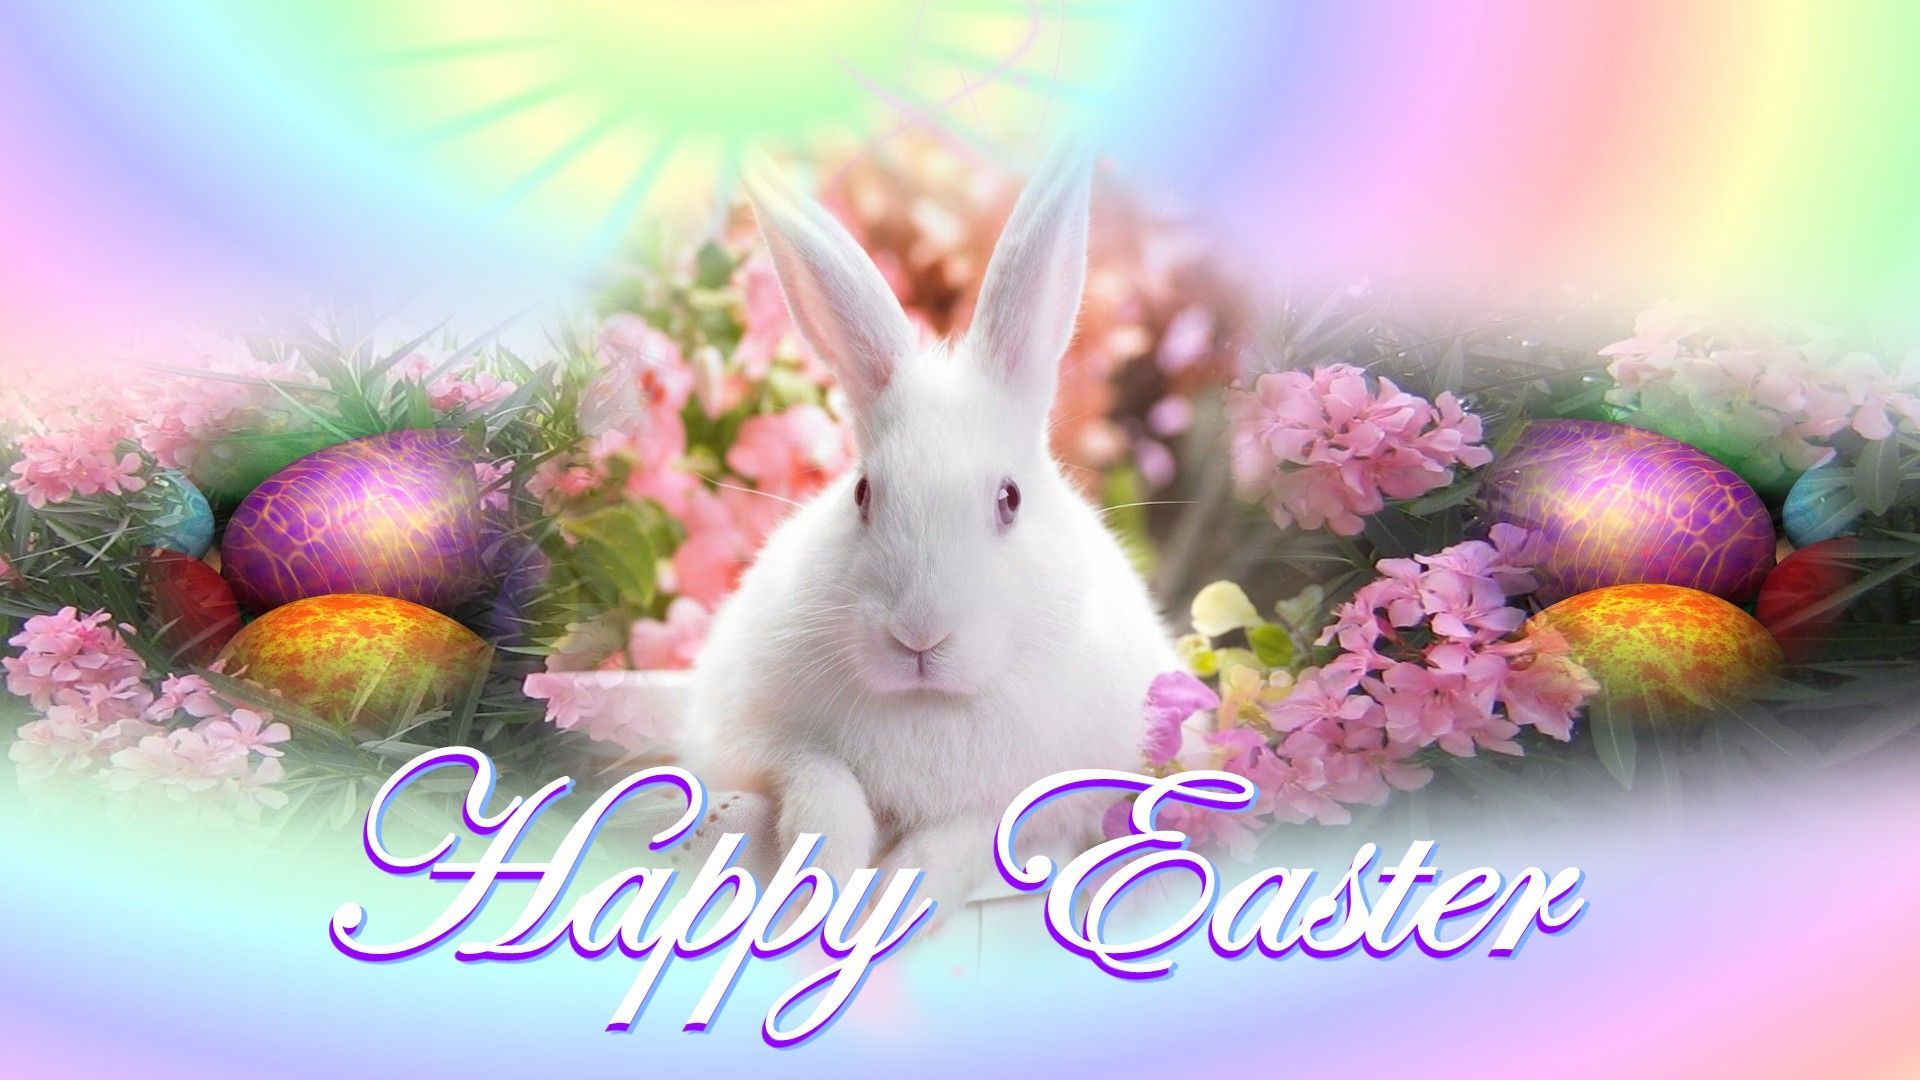 Happy Easter Bunny. Happy Easter Bunny, Easter Bunny Picture, Happy Easter Wallpaper